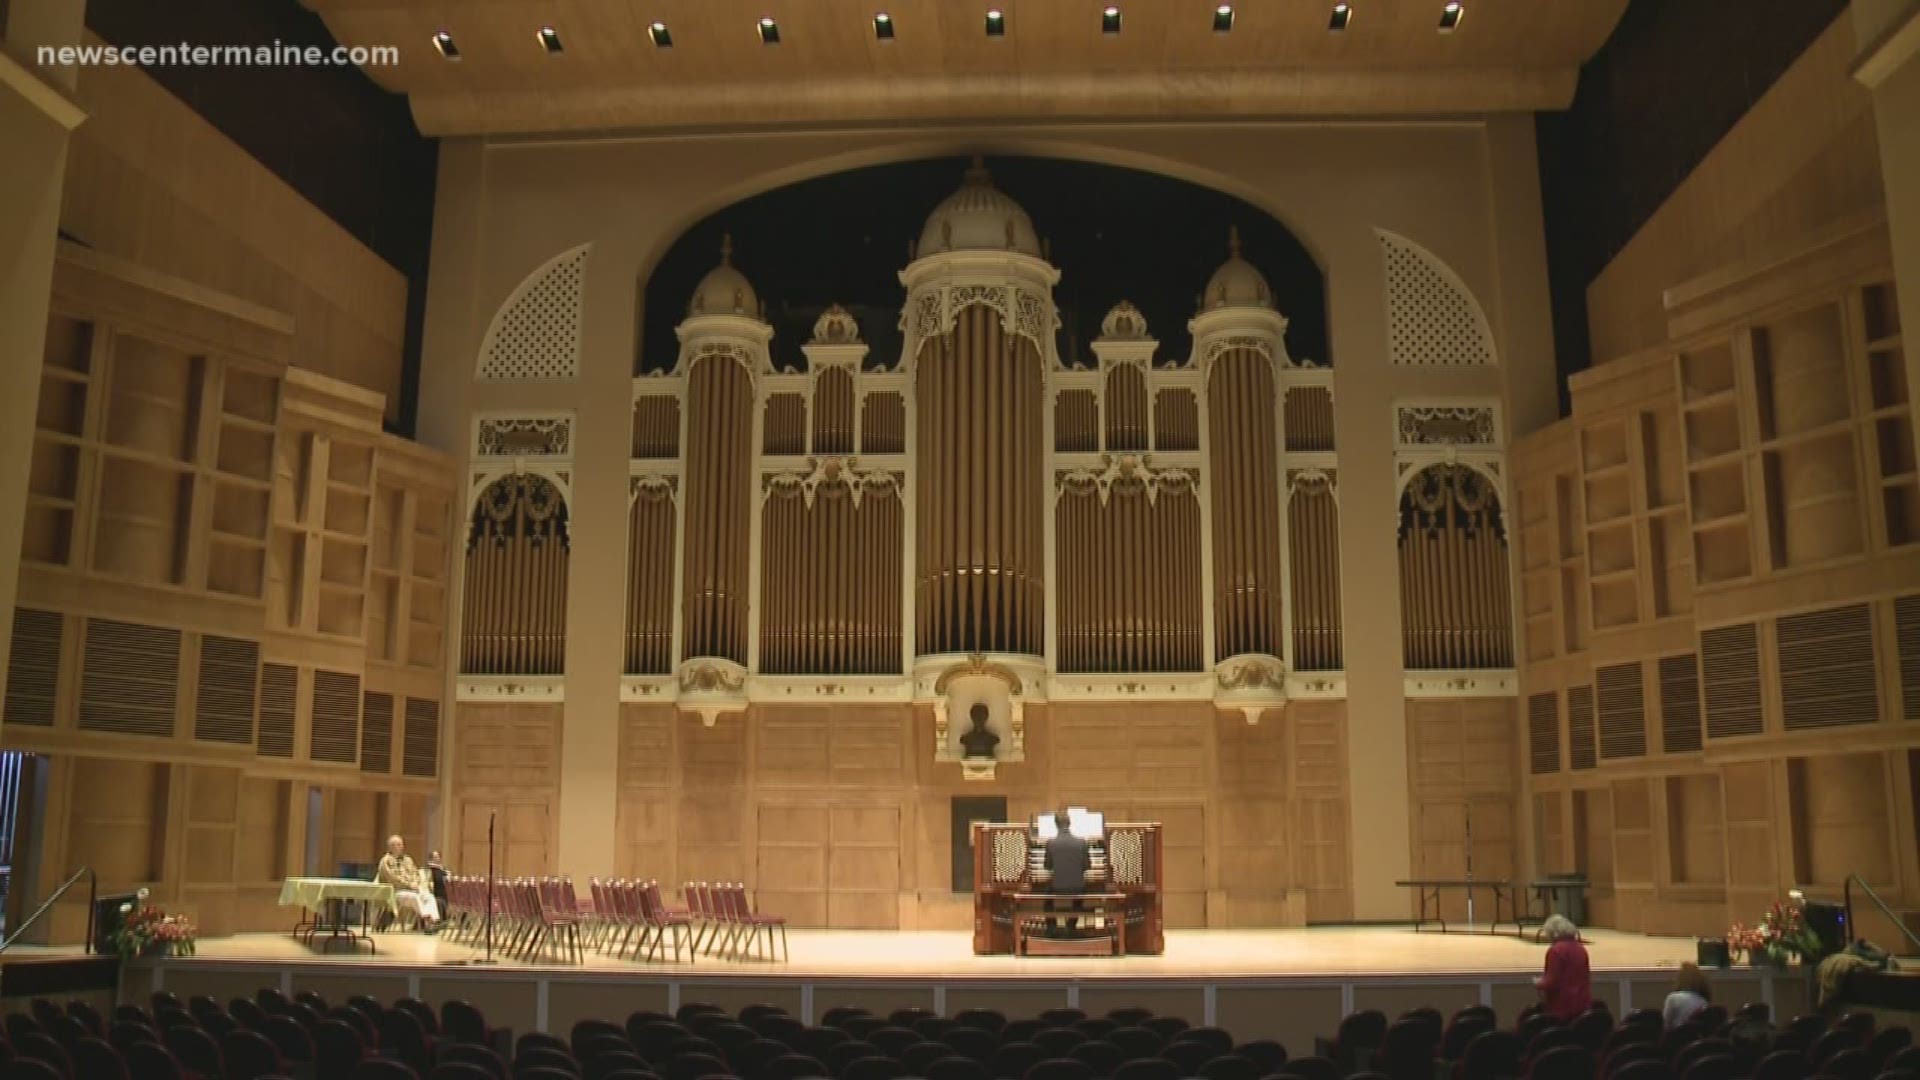 Organist James Kennerly will perform at Merrill Auditorium Wednesday to honor the late Johann Sebastian Bach.